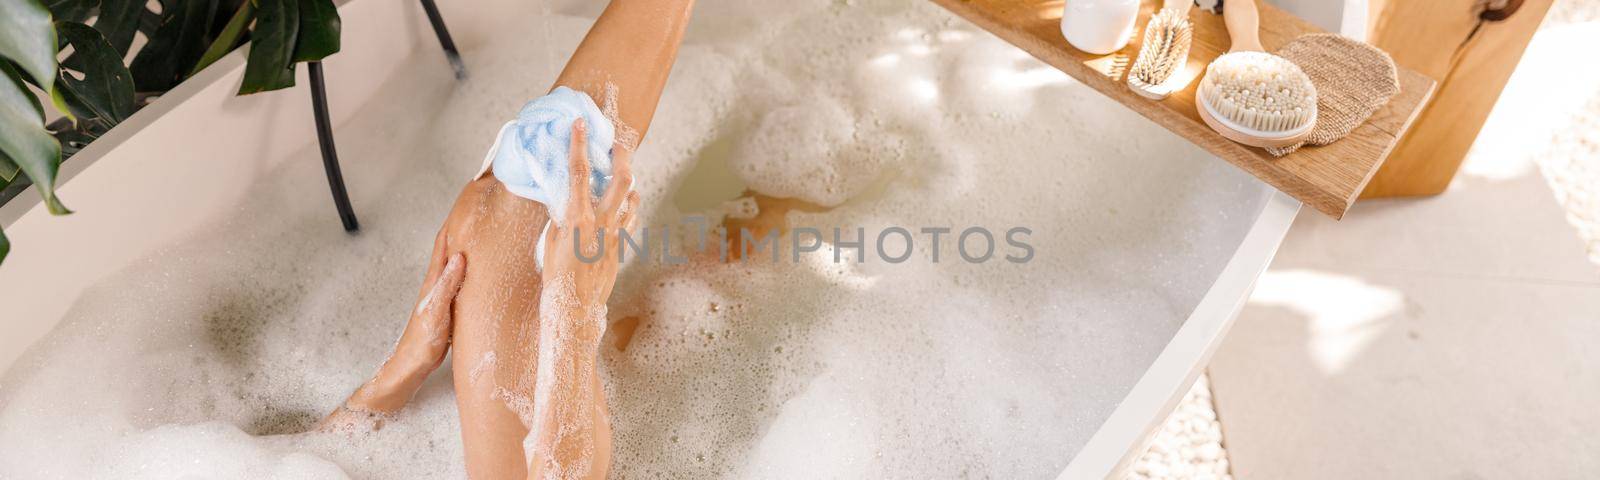 High angle view of young woman using sponge while bathing, relaxing in bubble filled bathtub. Wellness, spa resort concept